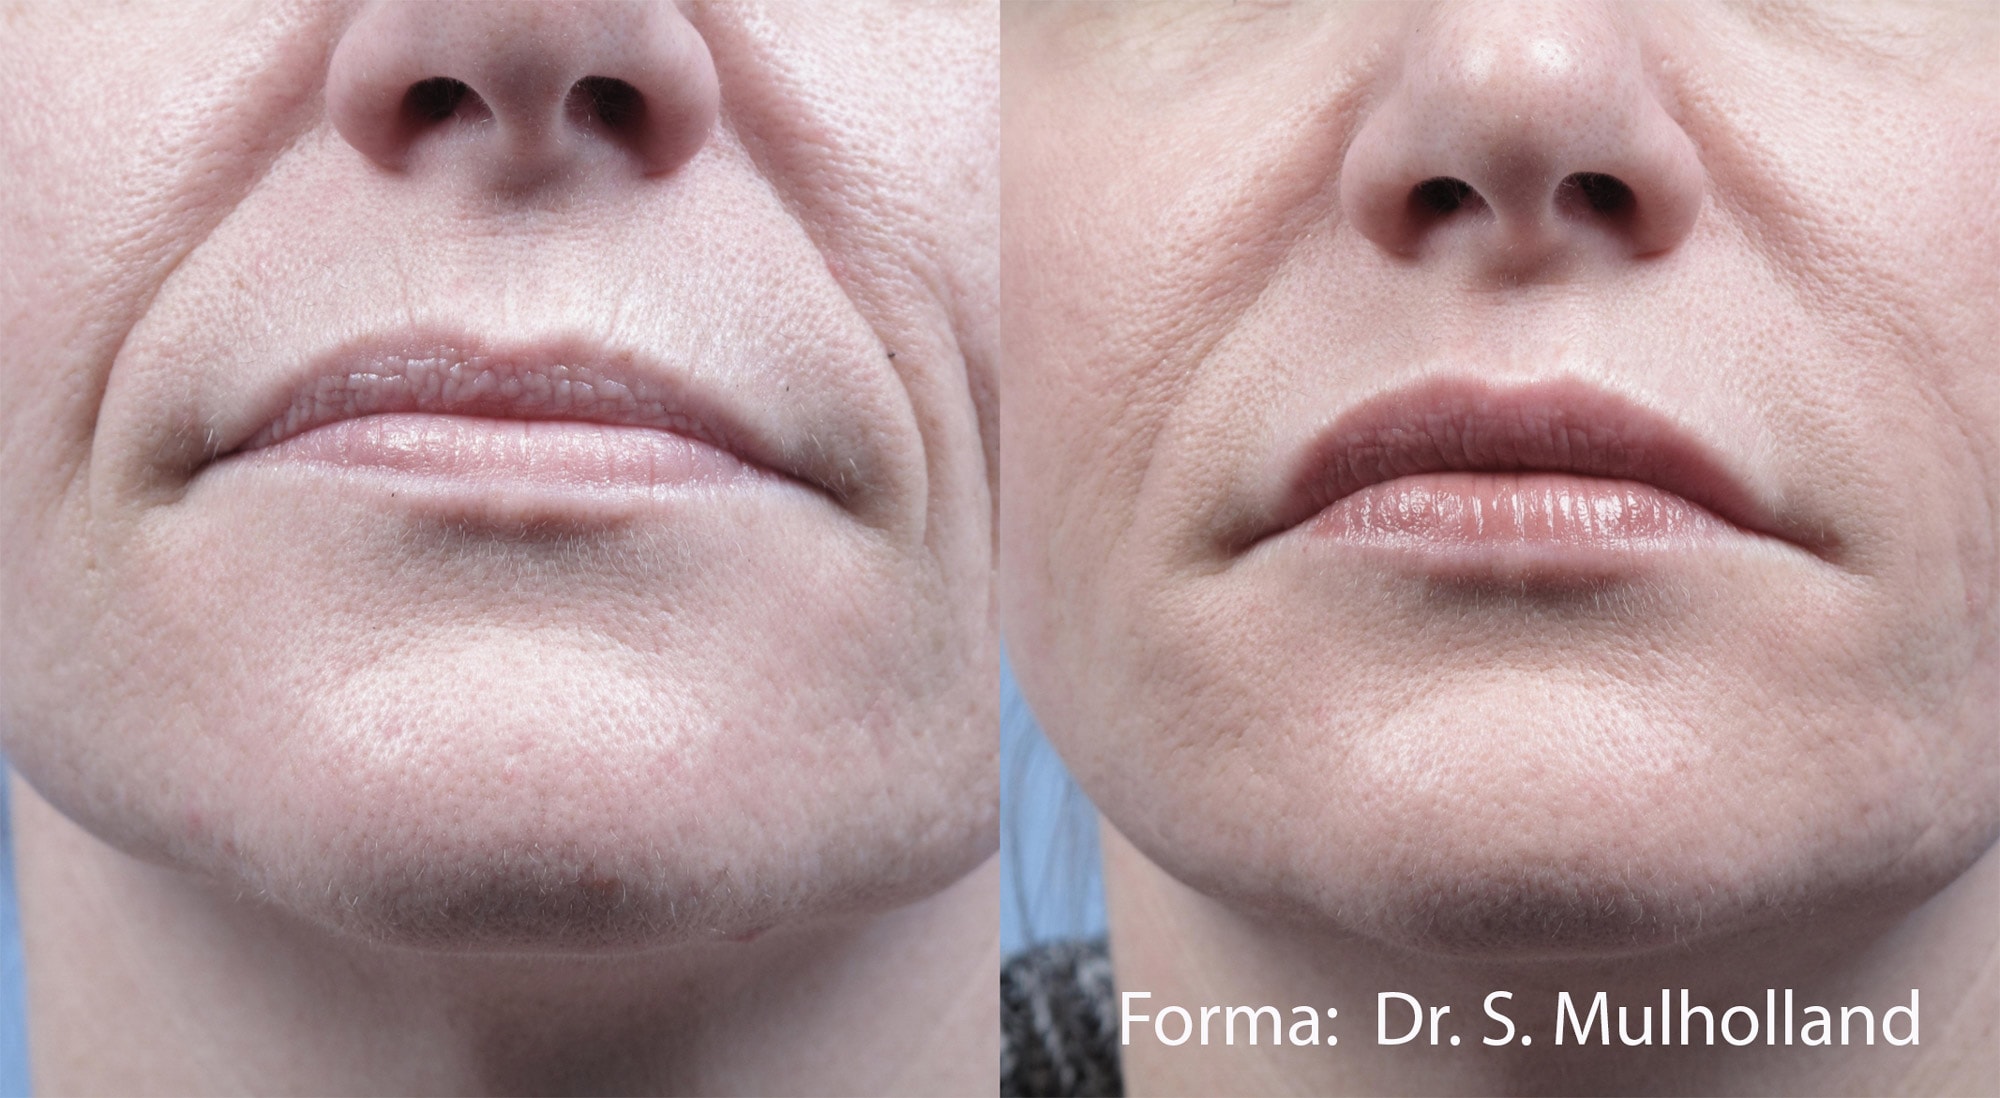 Before and After photos showing Forma treatments helping to remove fine lines and wrinkles around a woman’s mouth